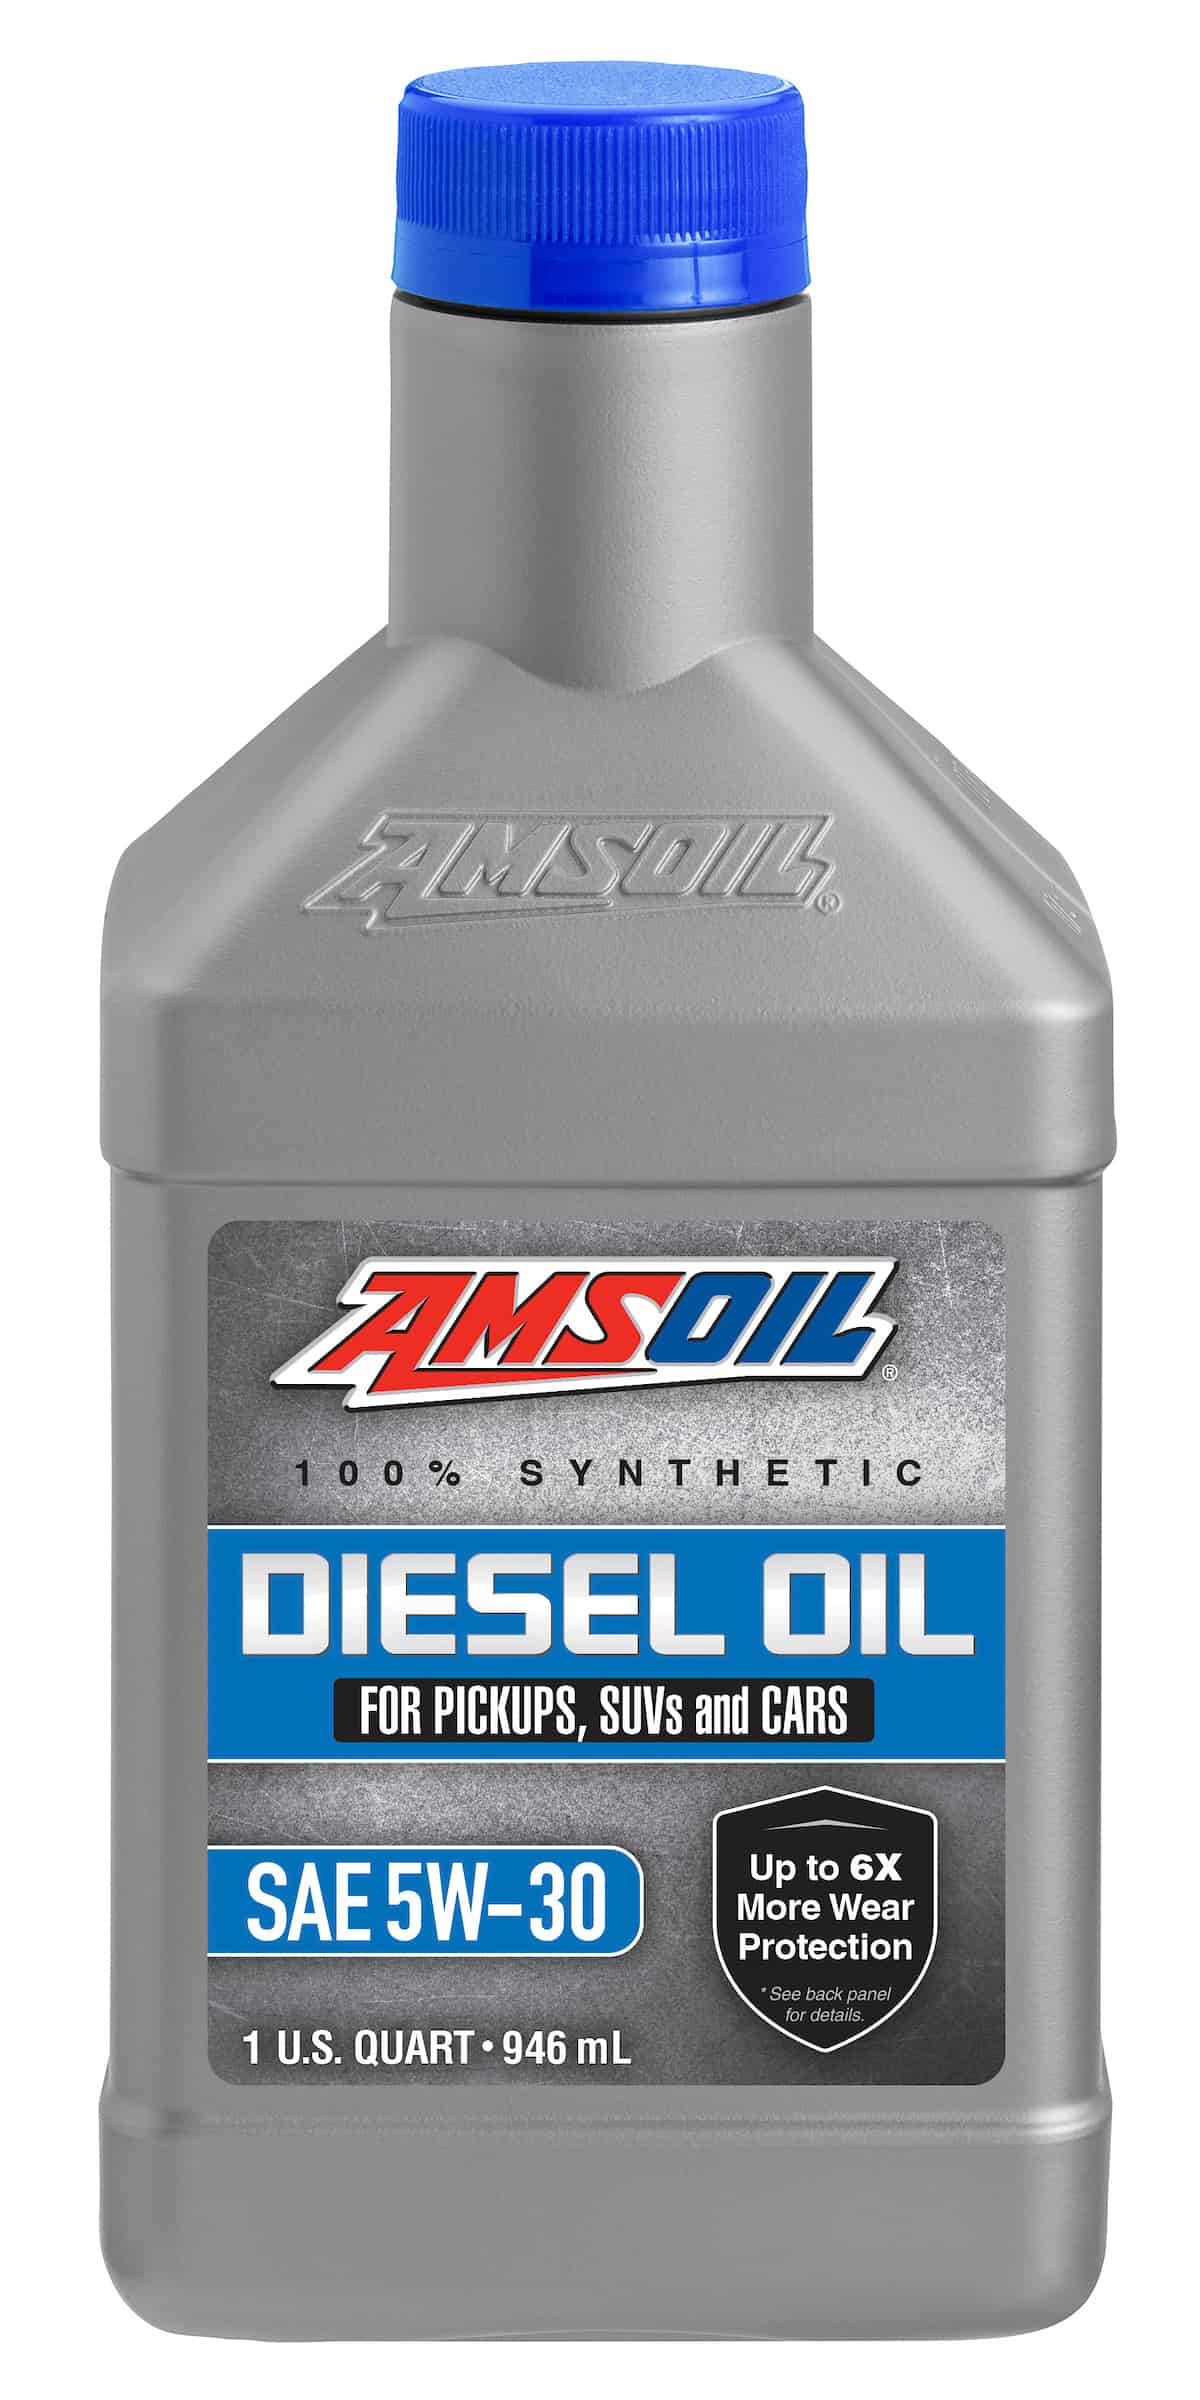 A bottle of AMSOIL's 100% Synthetic Diesel Oil formulated to protect the efficient diesel power of vehicles, to help them operate at peak performance.